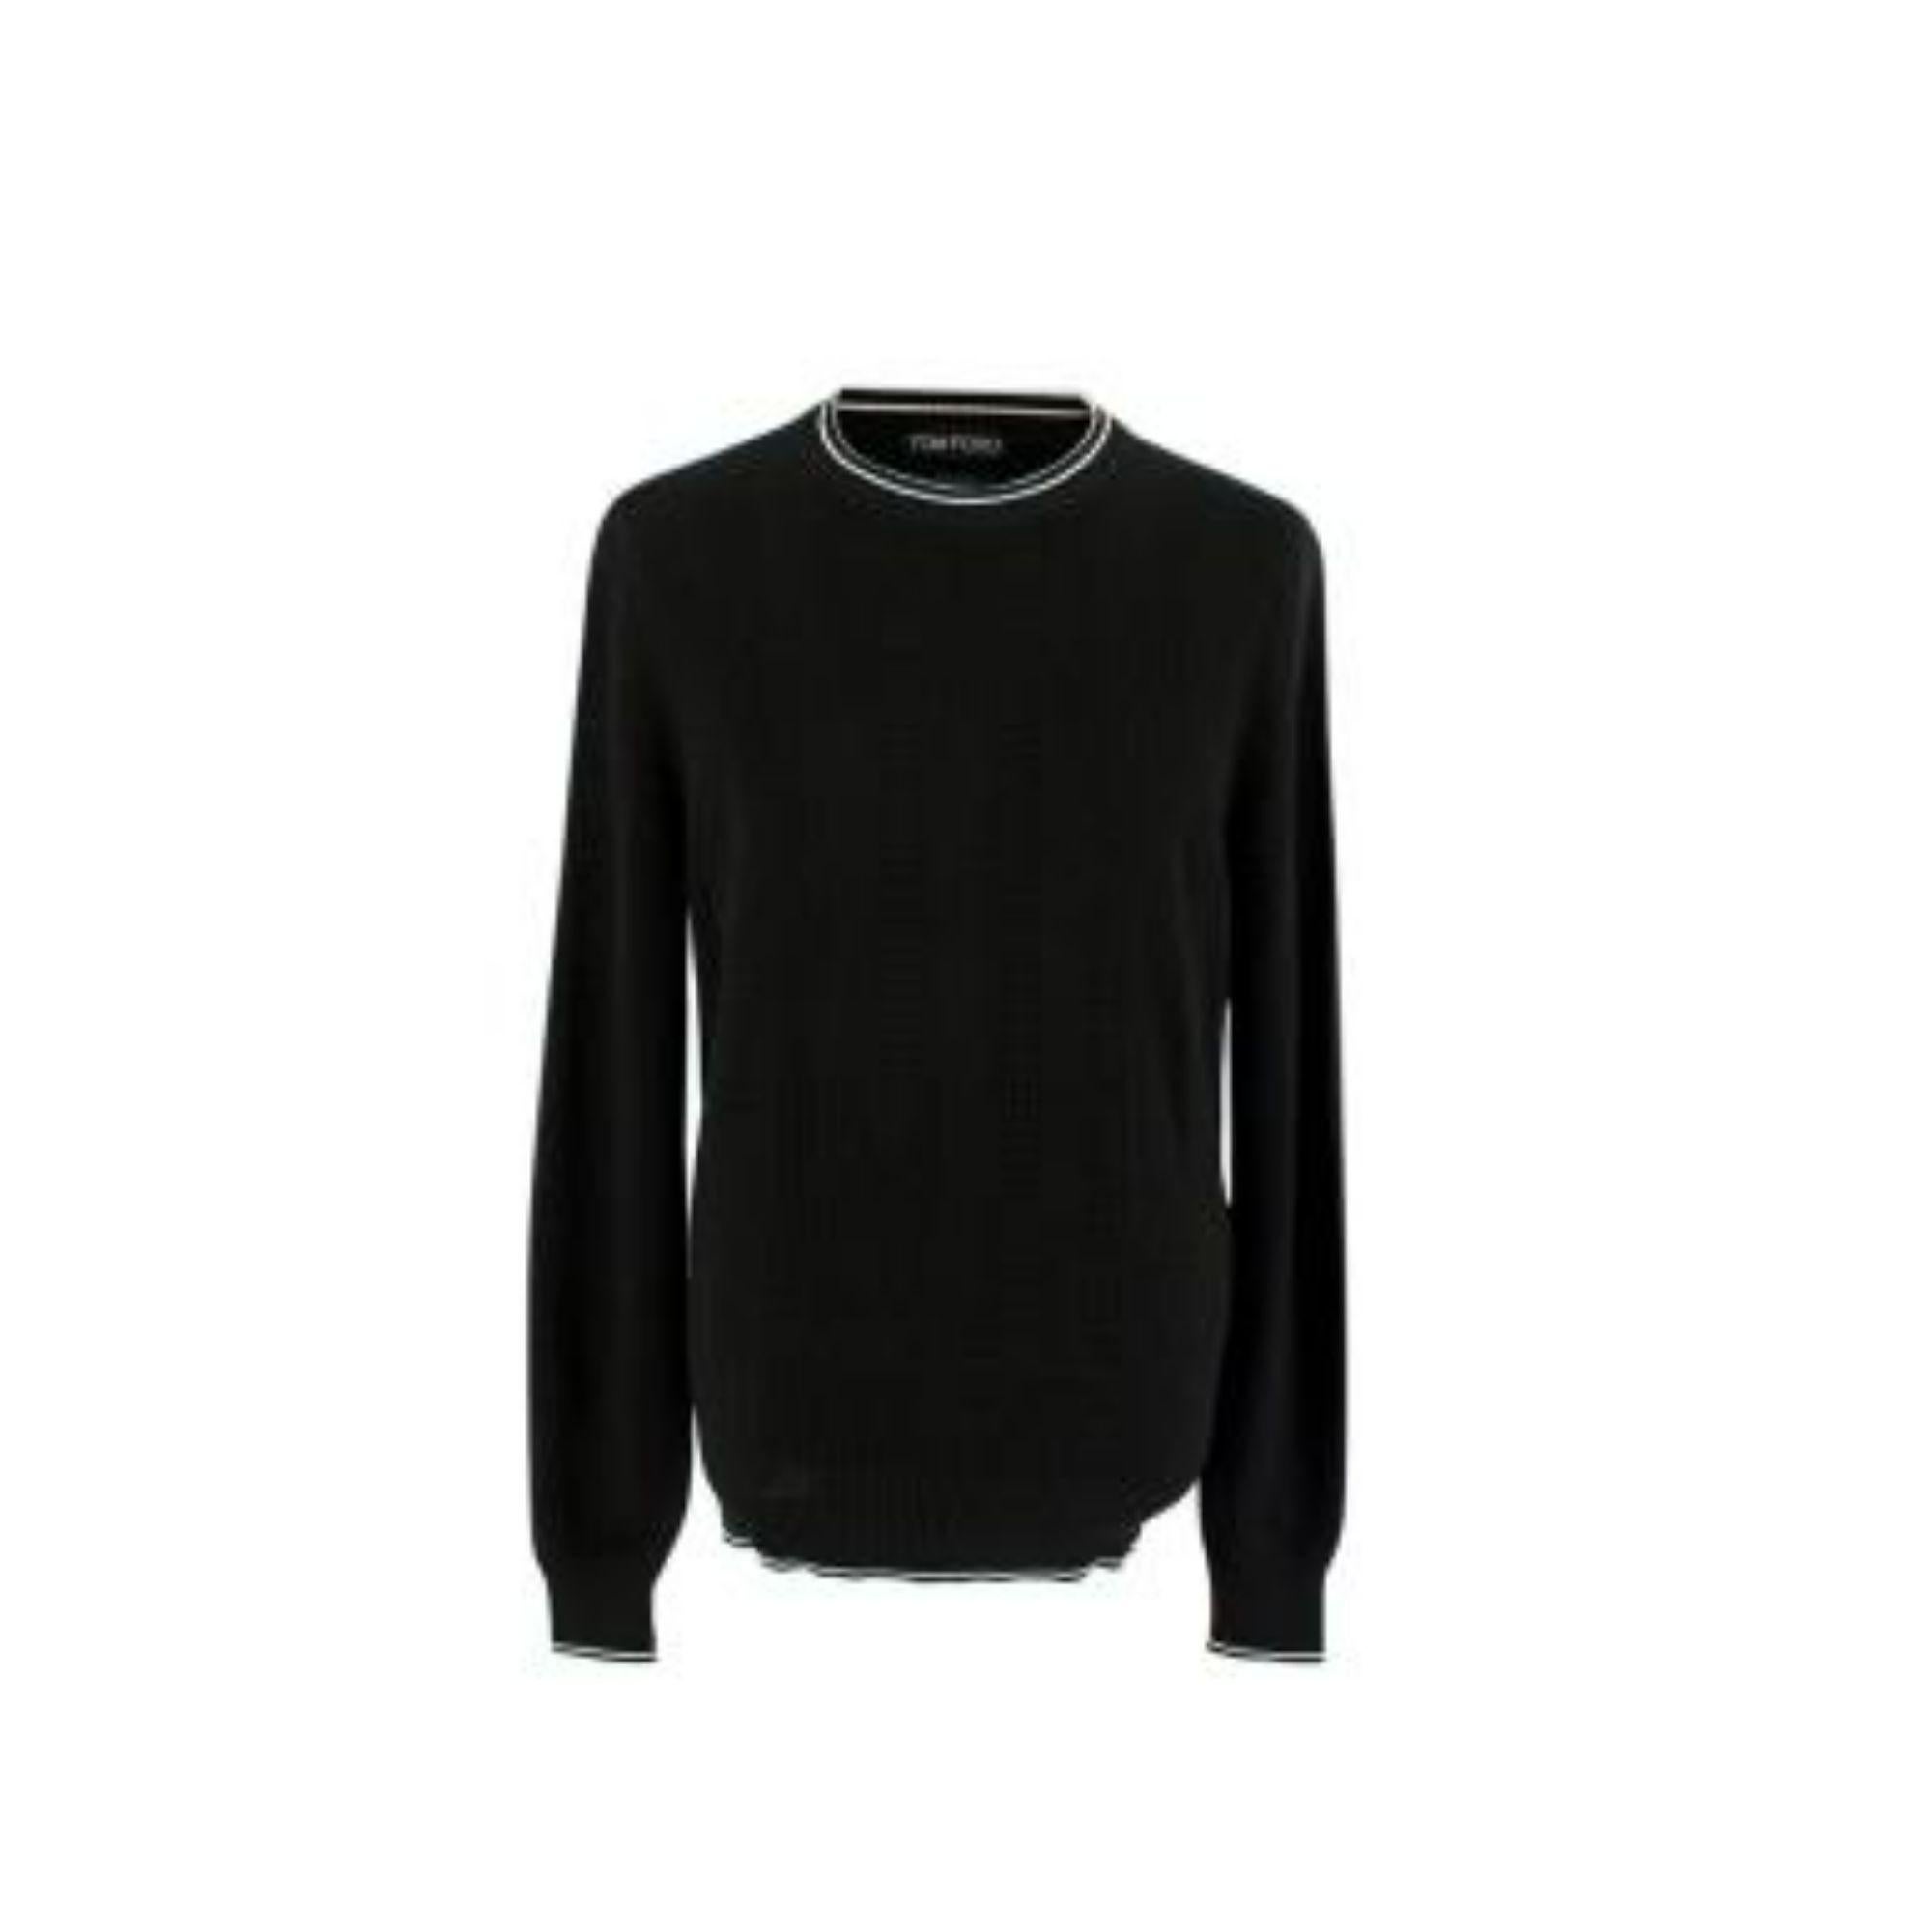 Tom Ford Black Silk & Cotton Knitted Jumper

- Long sleeved
- Fine knitted
- Ribbed cuffs, waist, and neck with white trim detailing
- Light construction

Material
50% Silk, 50% Cotton

Made in Italy

9.5/10 Excellent condition

PLEASE NOTE, THESE